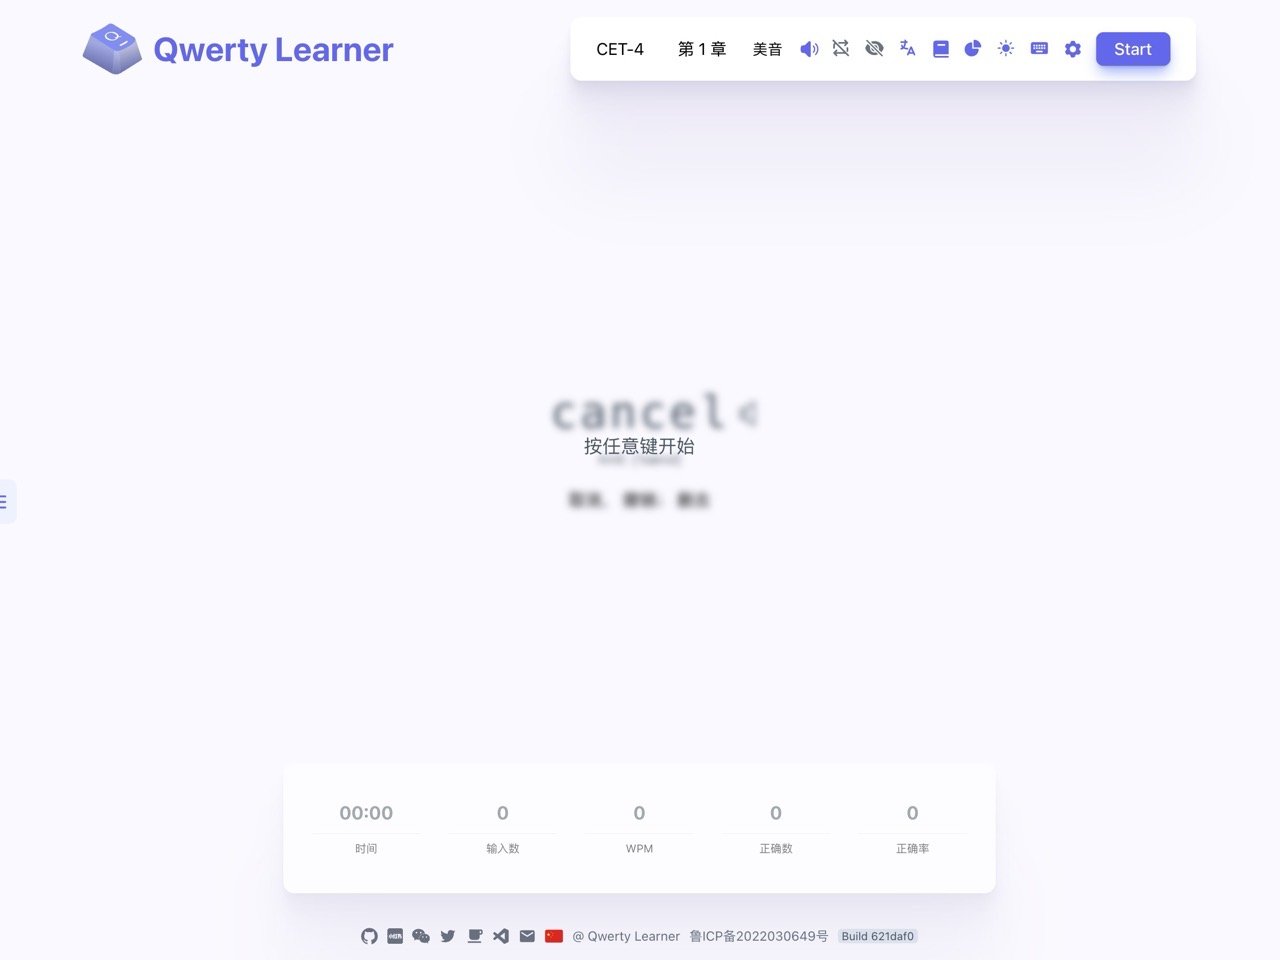 Qwerty Learner